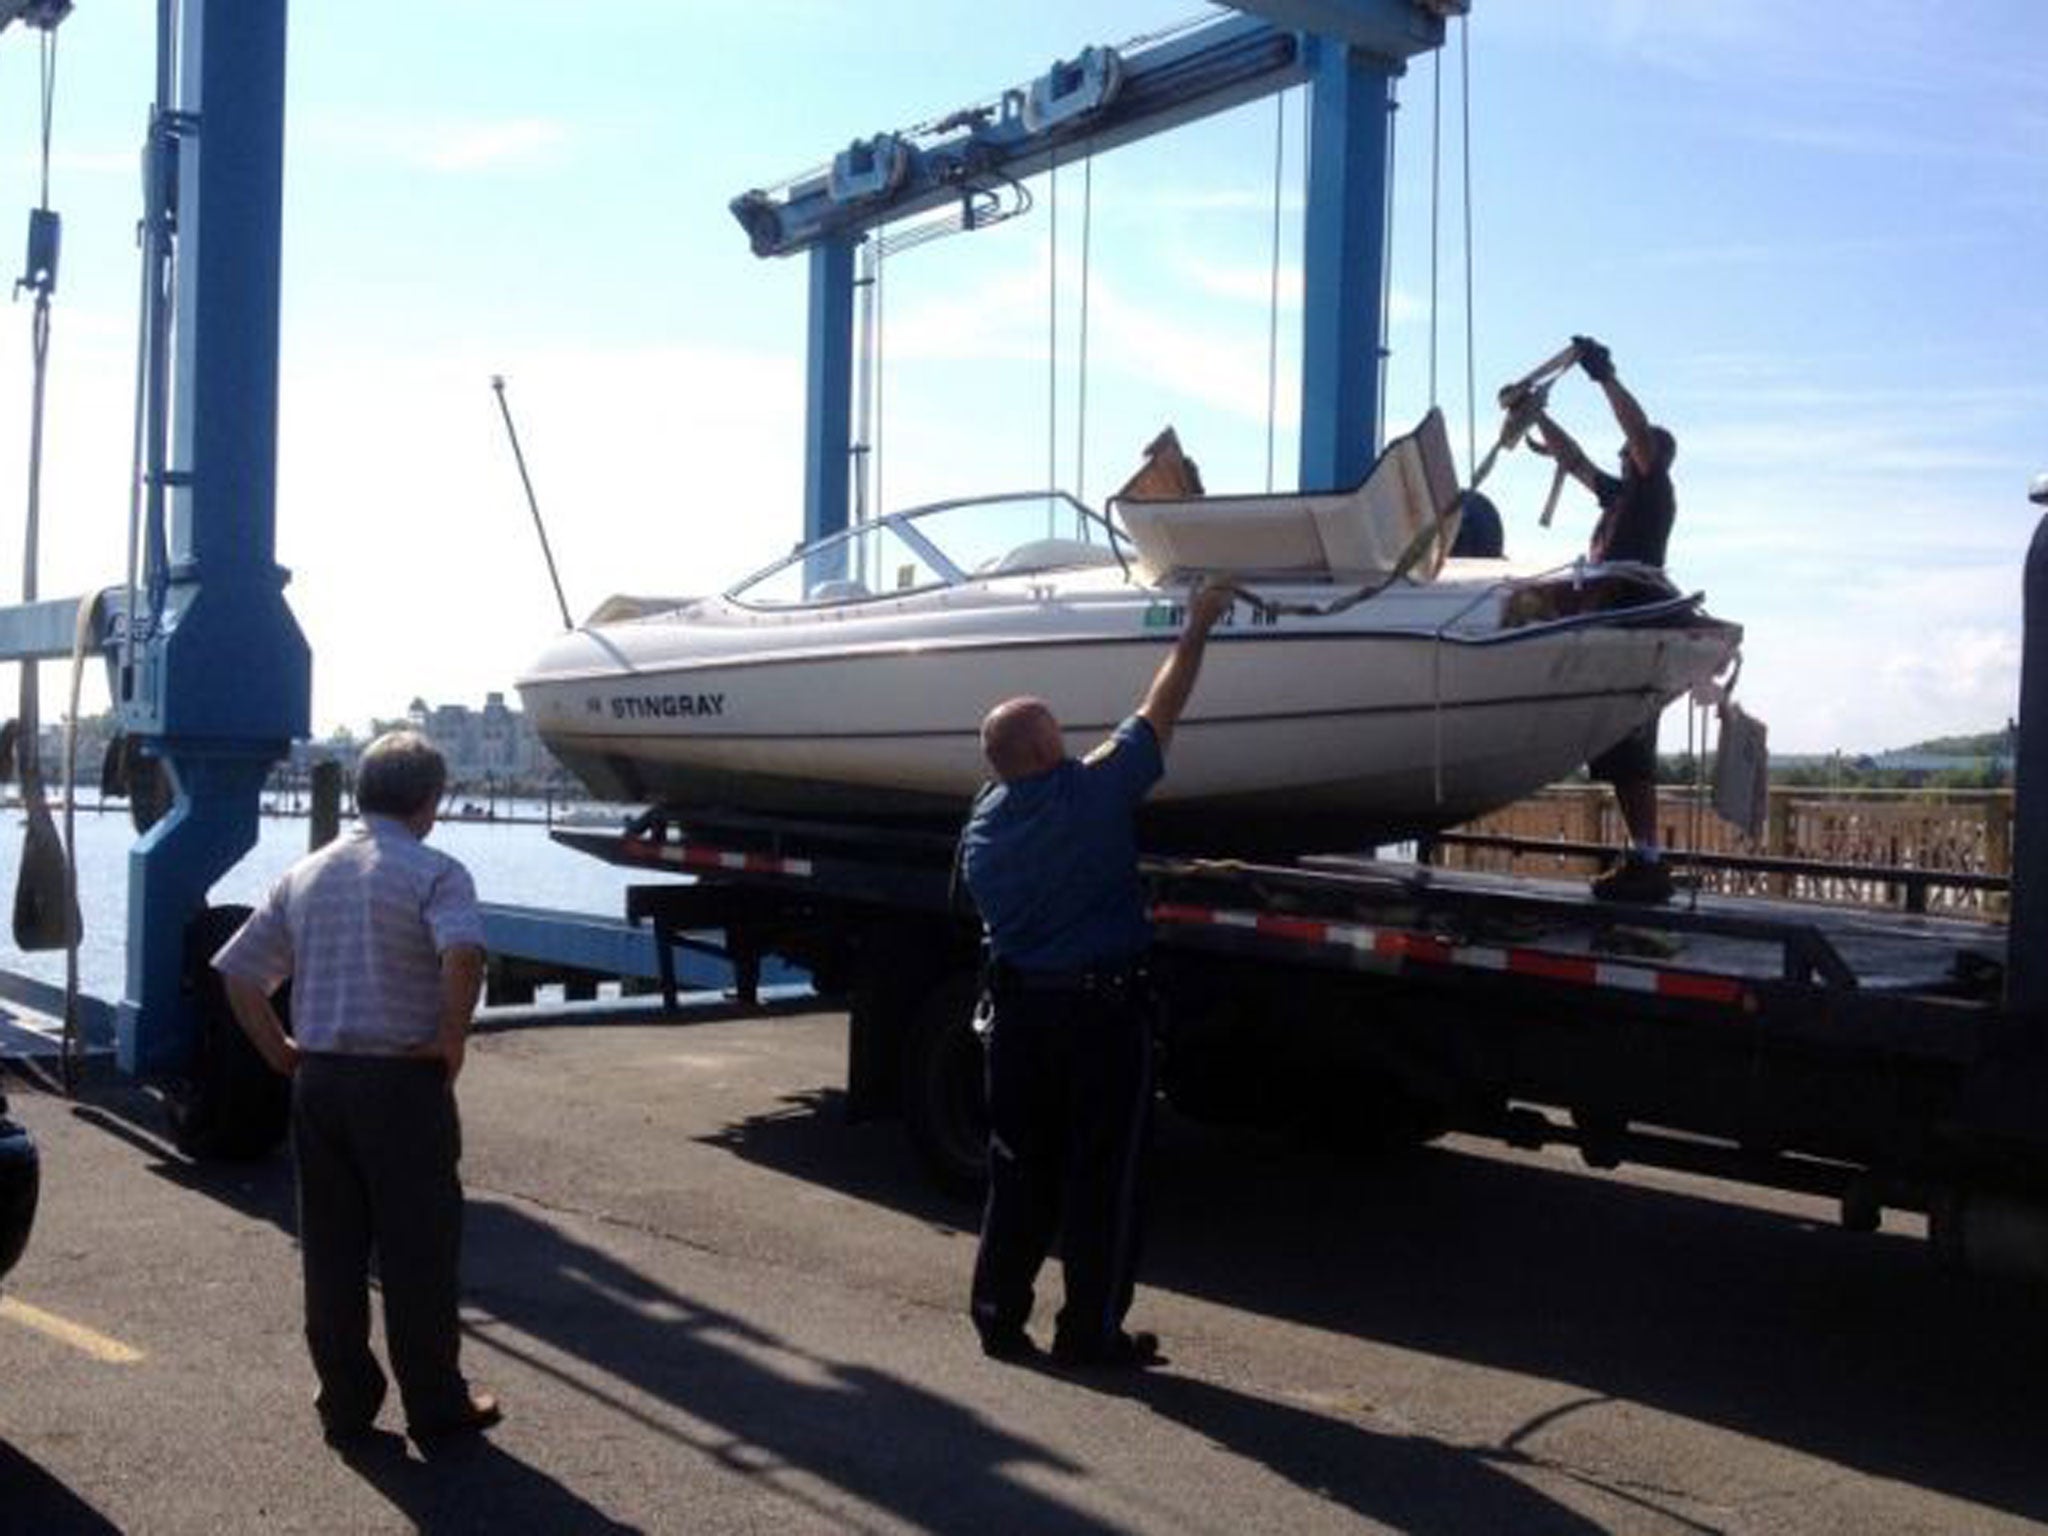 The 21-foot Stingray powerboat involved in an accident on the Hudson River